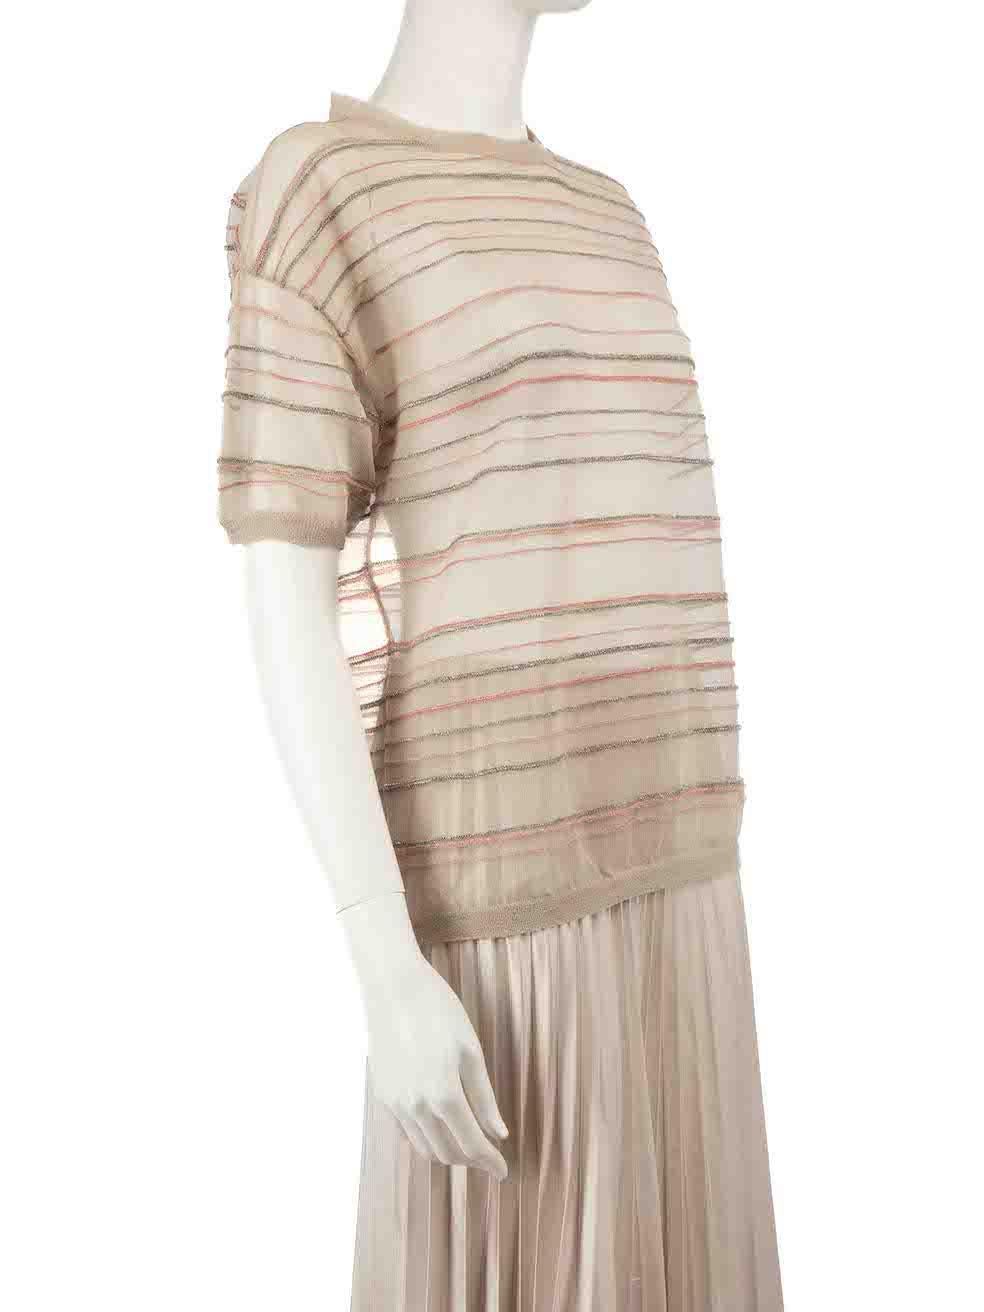 CONDITION is Very good. Minimal wear to top is evident. Composition and size label has been removed on this used Brunello Cucinelli designer resale item.
 
 
 
 Details
 
 
 Beige
 
 Synthetic
 
 Top
 
 Striped metallic pattern
 
 Short sleeves
 
